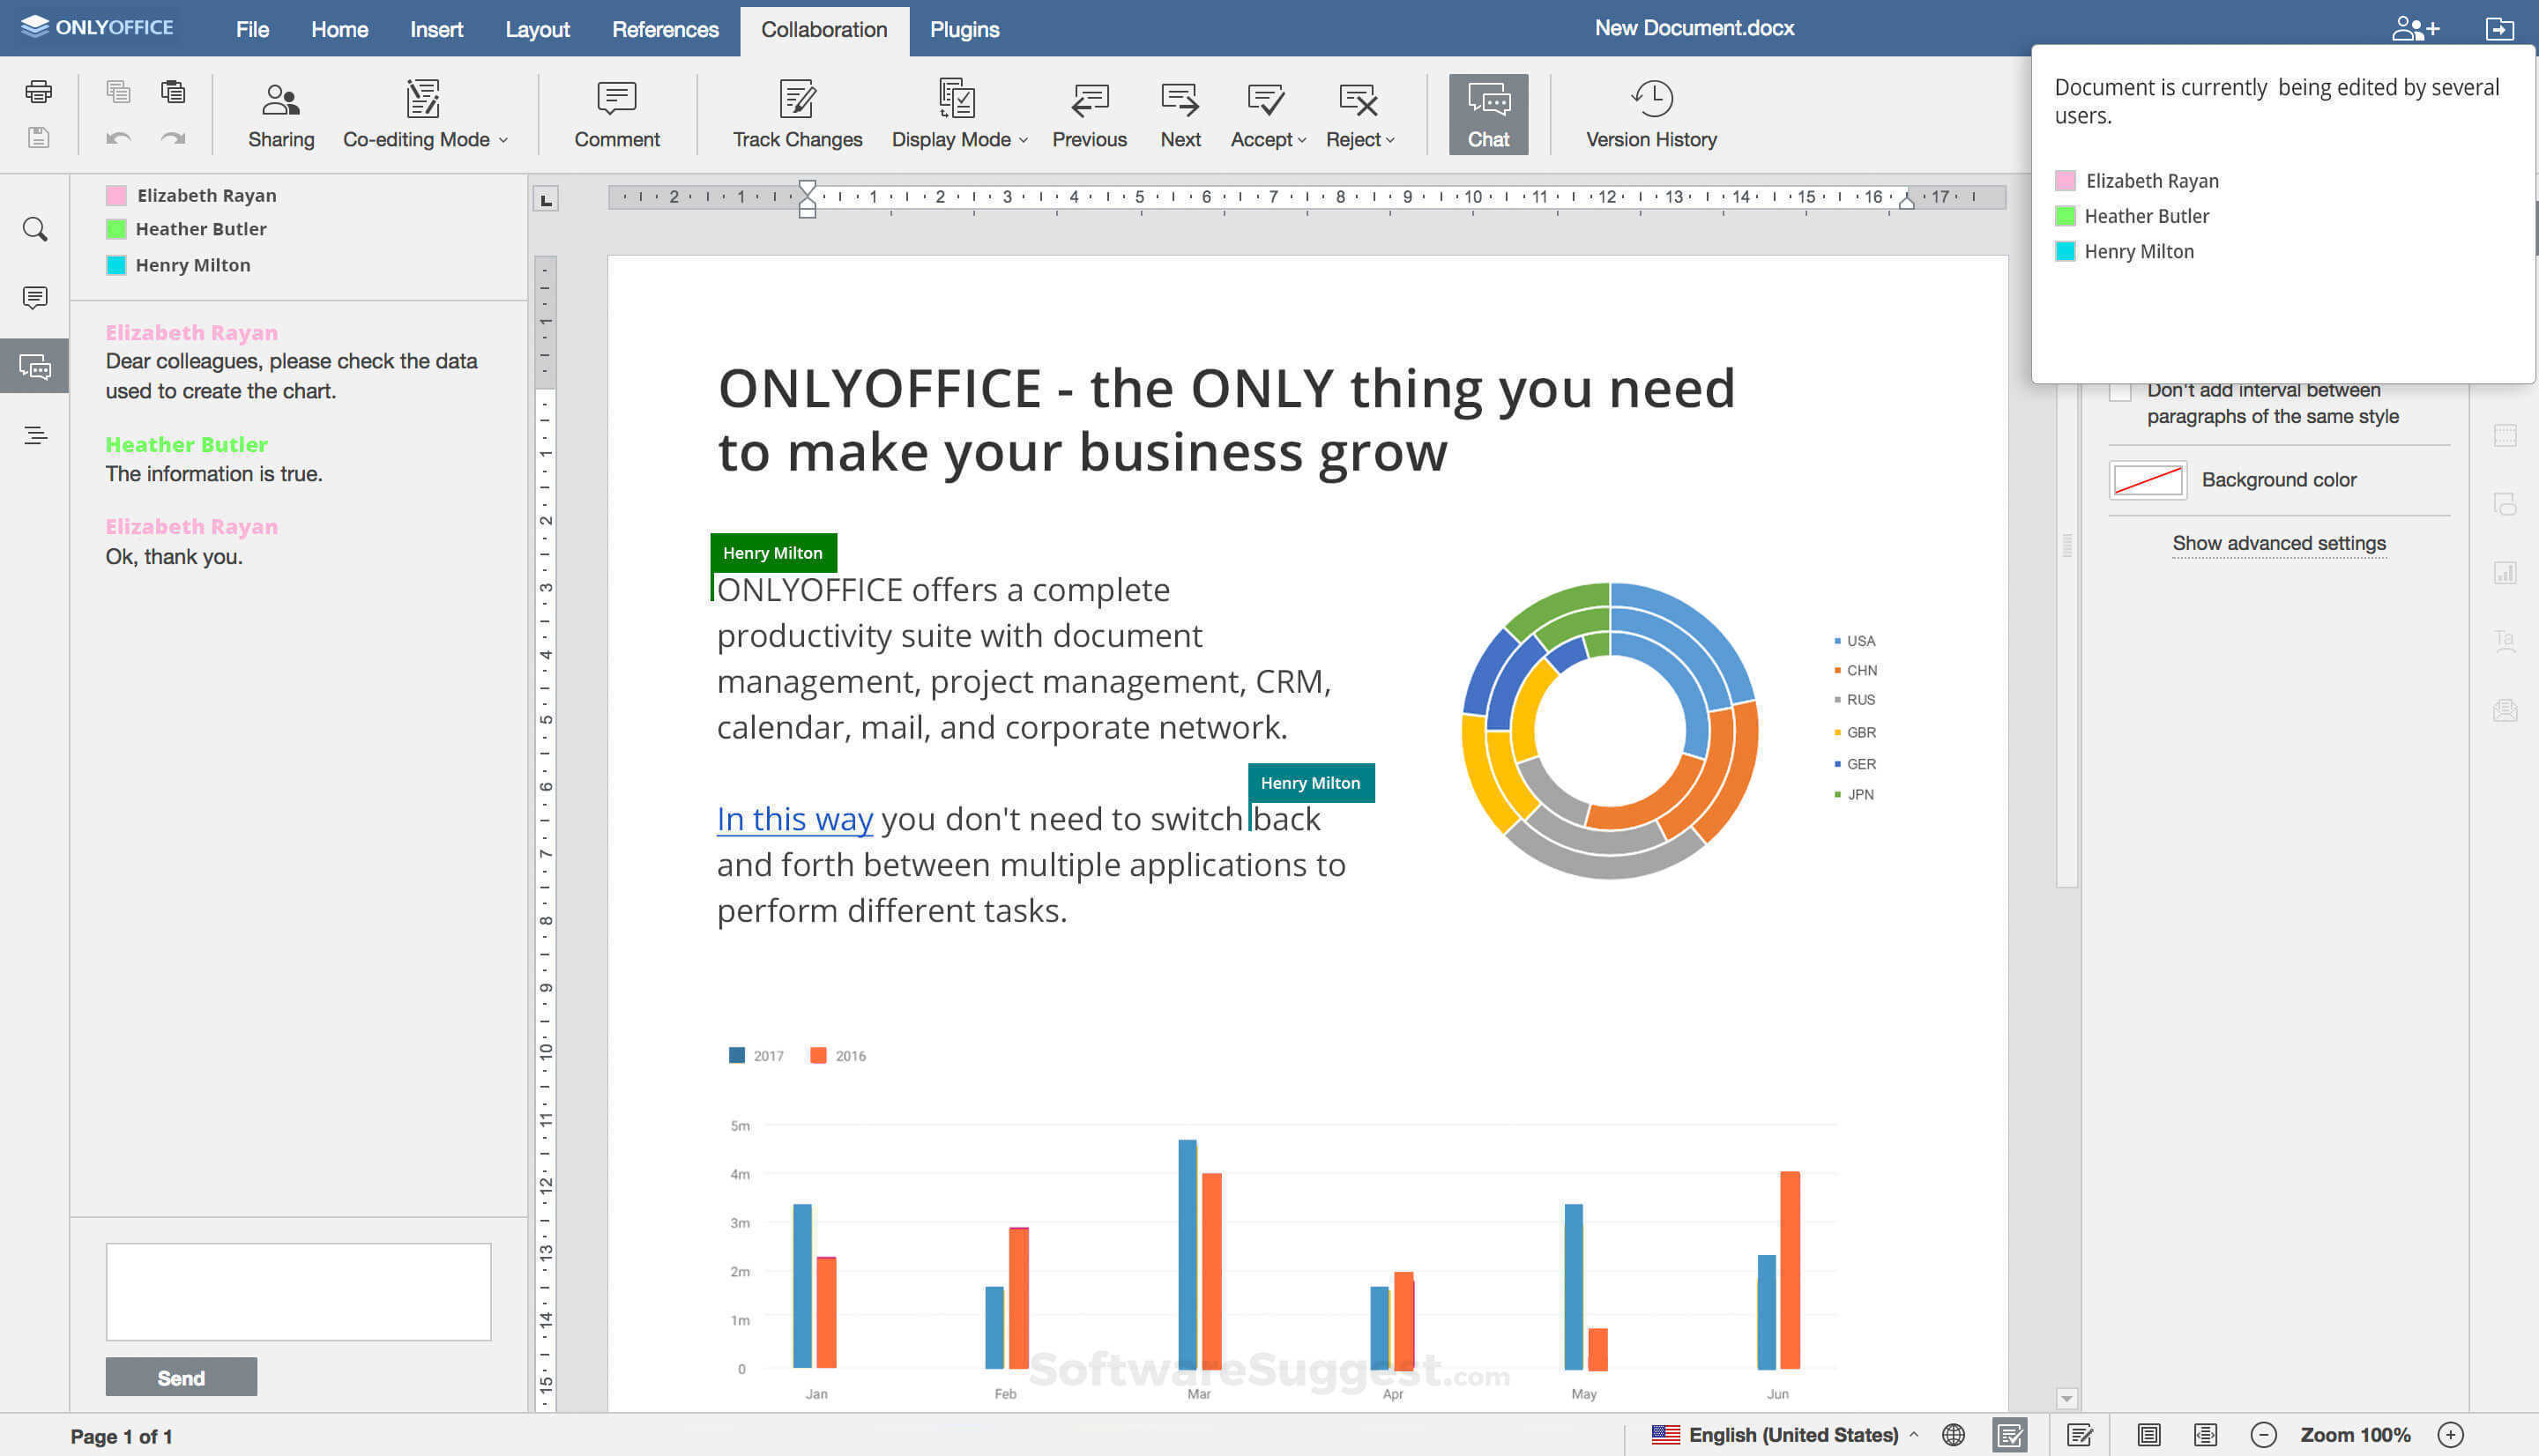 download the new for ios ONLYOFFICE 7.4.1.36